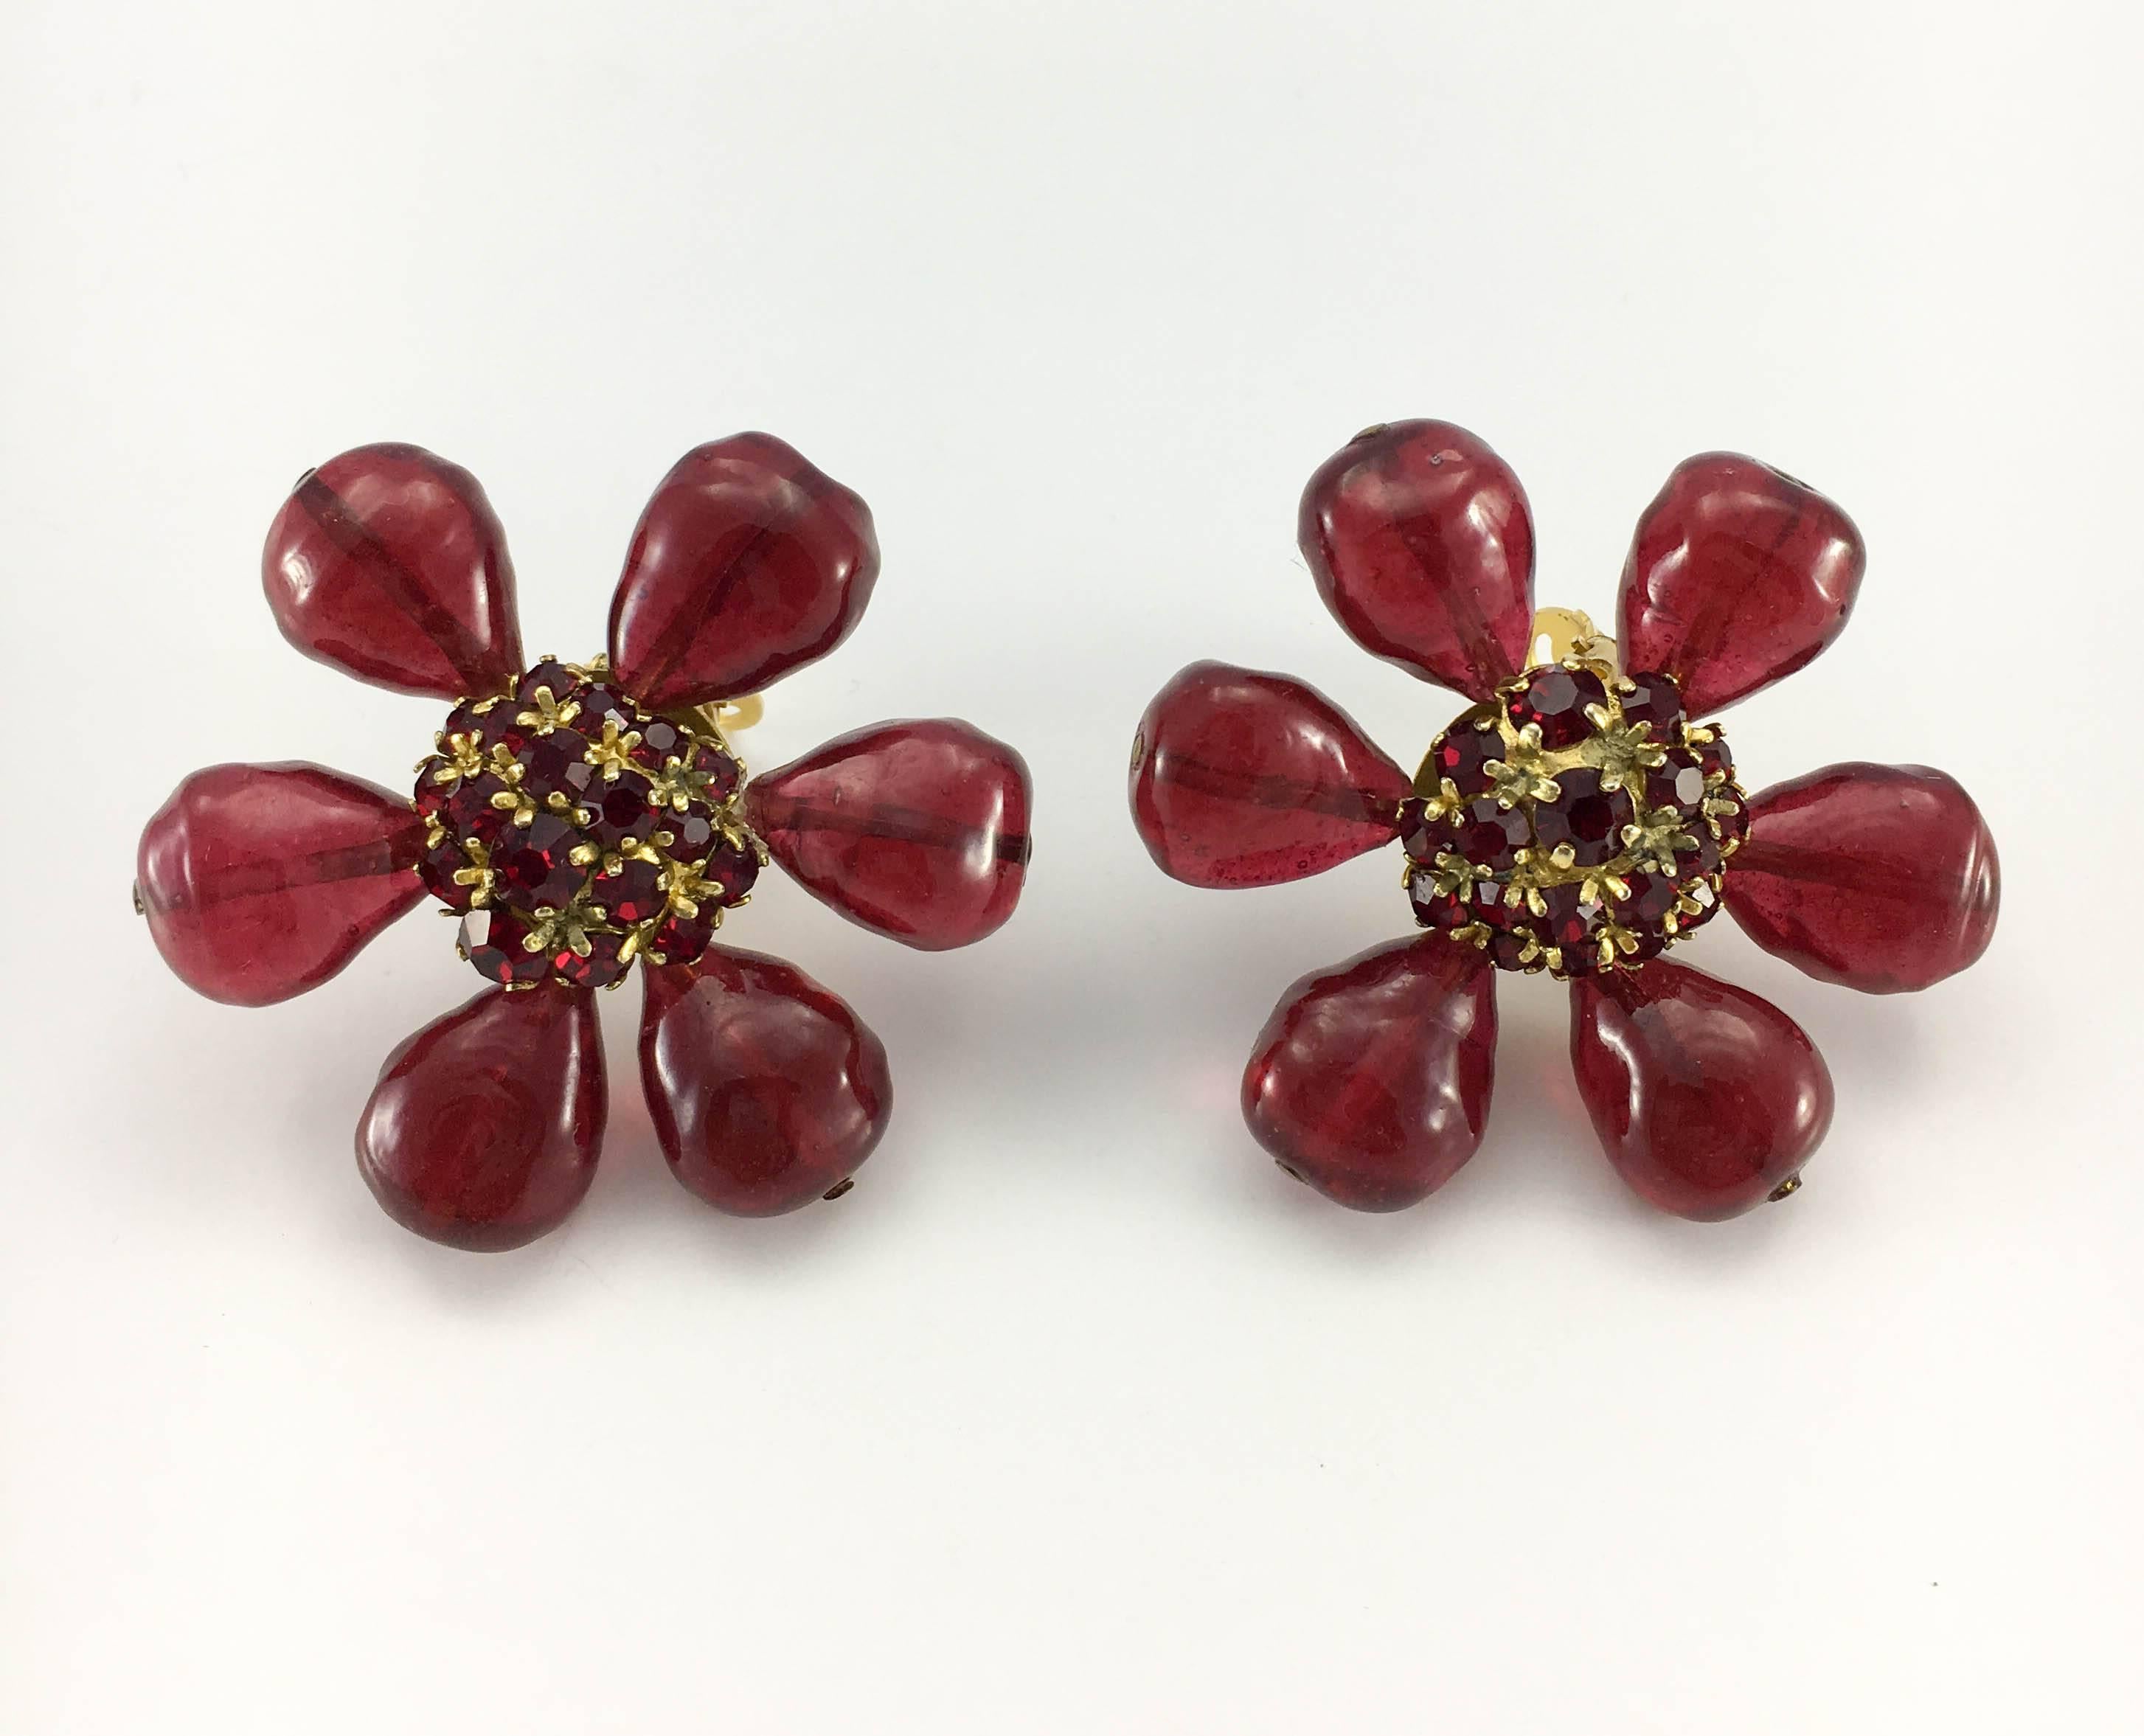 Stunning Vintage Chanel Red Gripoix Flower Clip-On Earrings. These amazing earrings by Chanel date back from the 1970’s. They are shaped as large stylised flowers. The petals are made in deep, burnt red gripoix (poured glass), whereas the centre